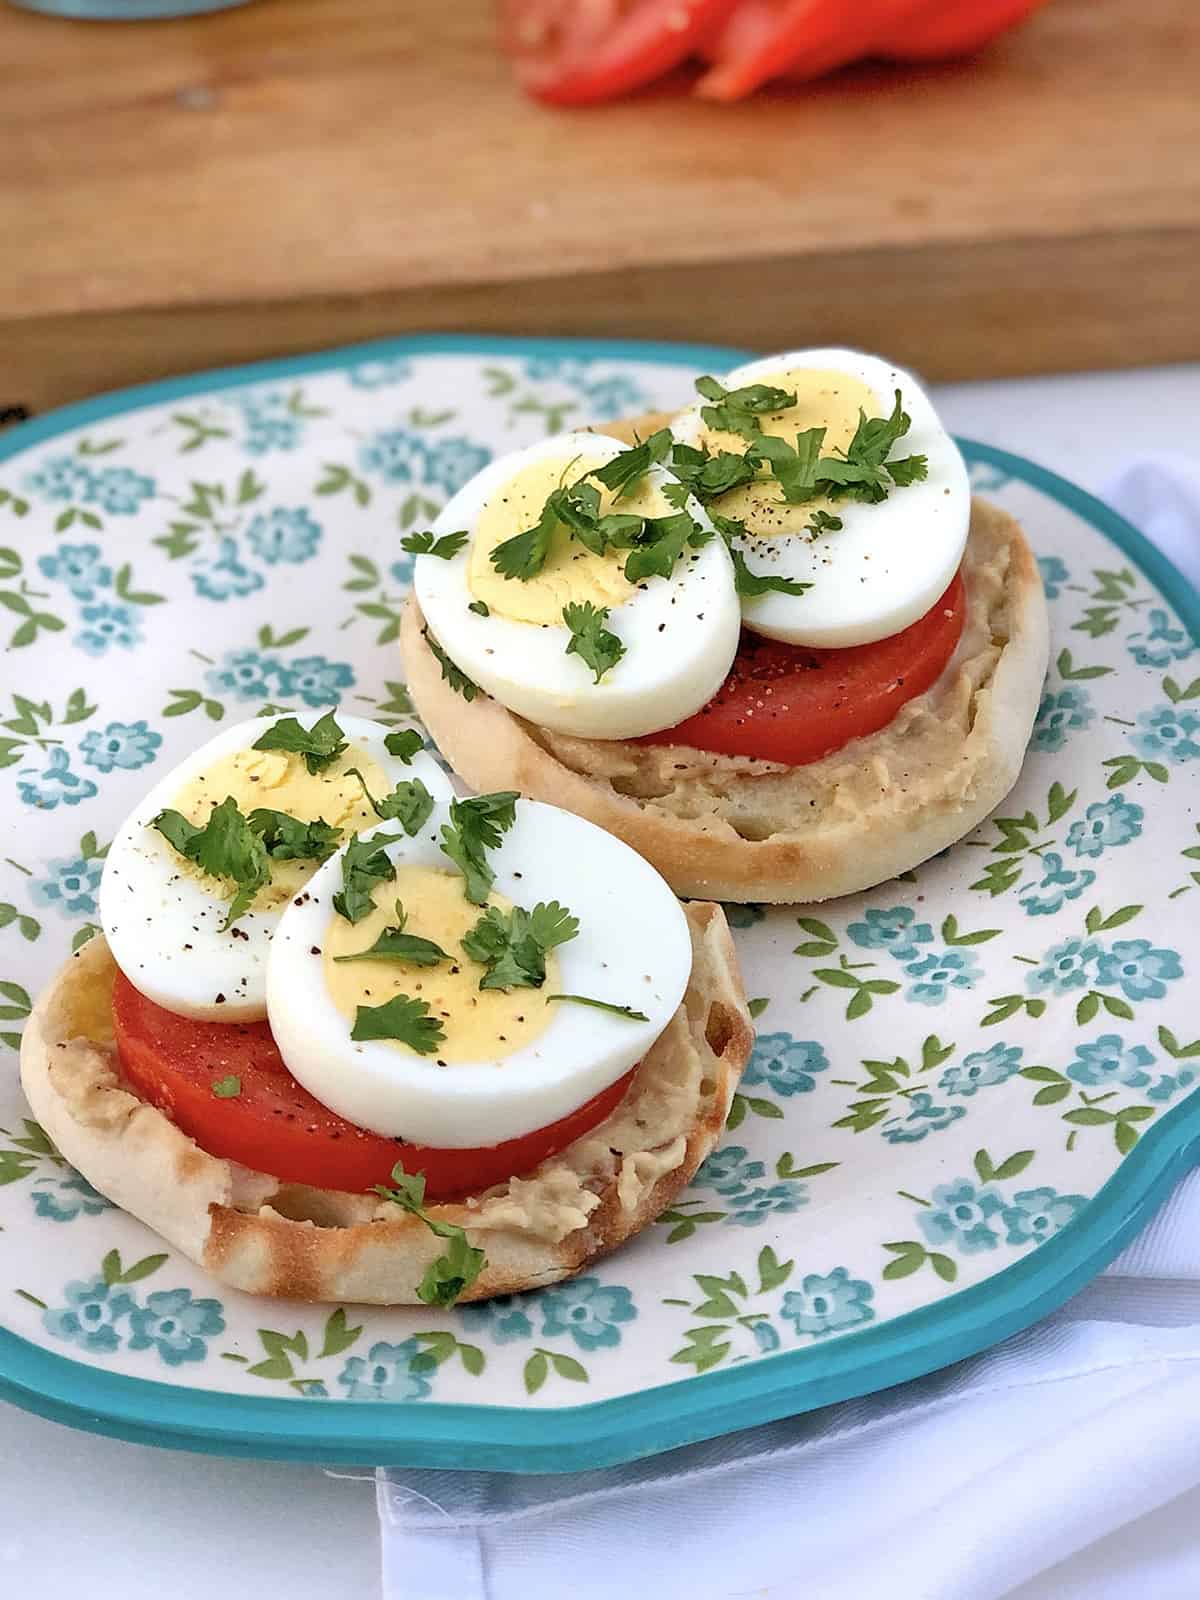 https://www.sandytoesandpopsicles.com/wp-content/uploads/2019/07/How-to-Make-Tomato-Egg-Hummus-English-Muffin-Sandwiche_feature.jpg